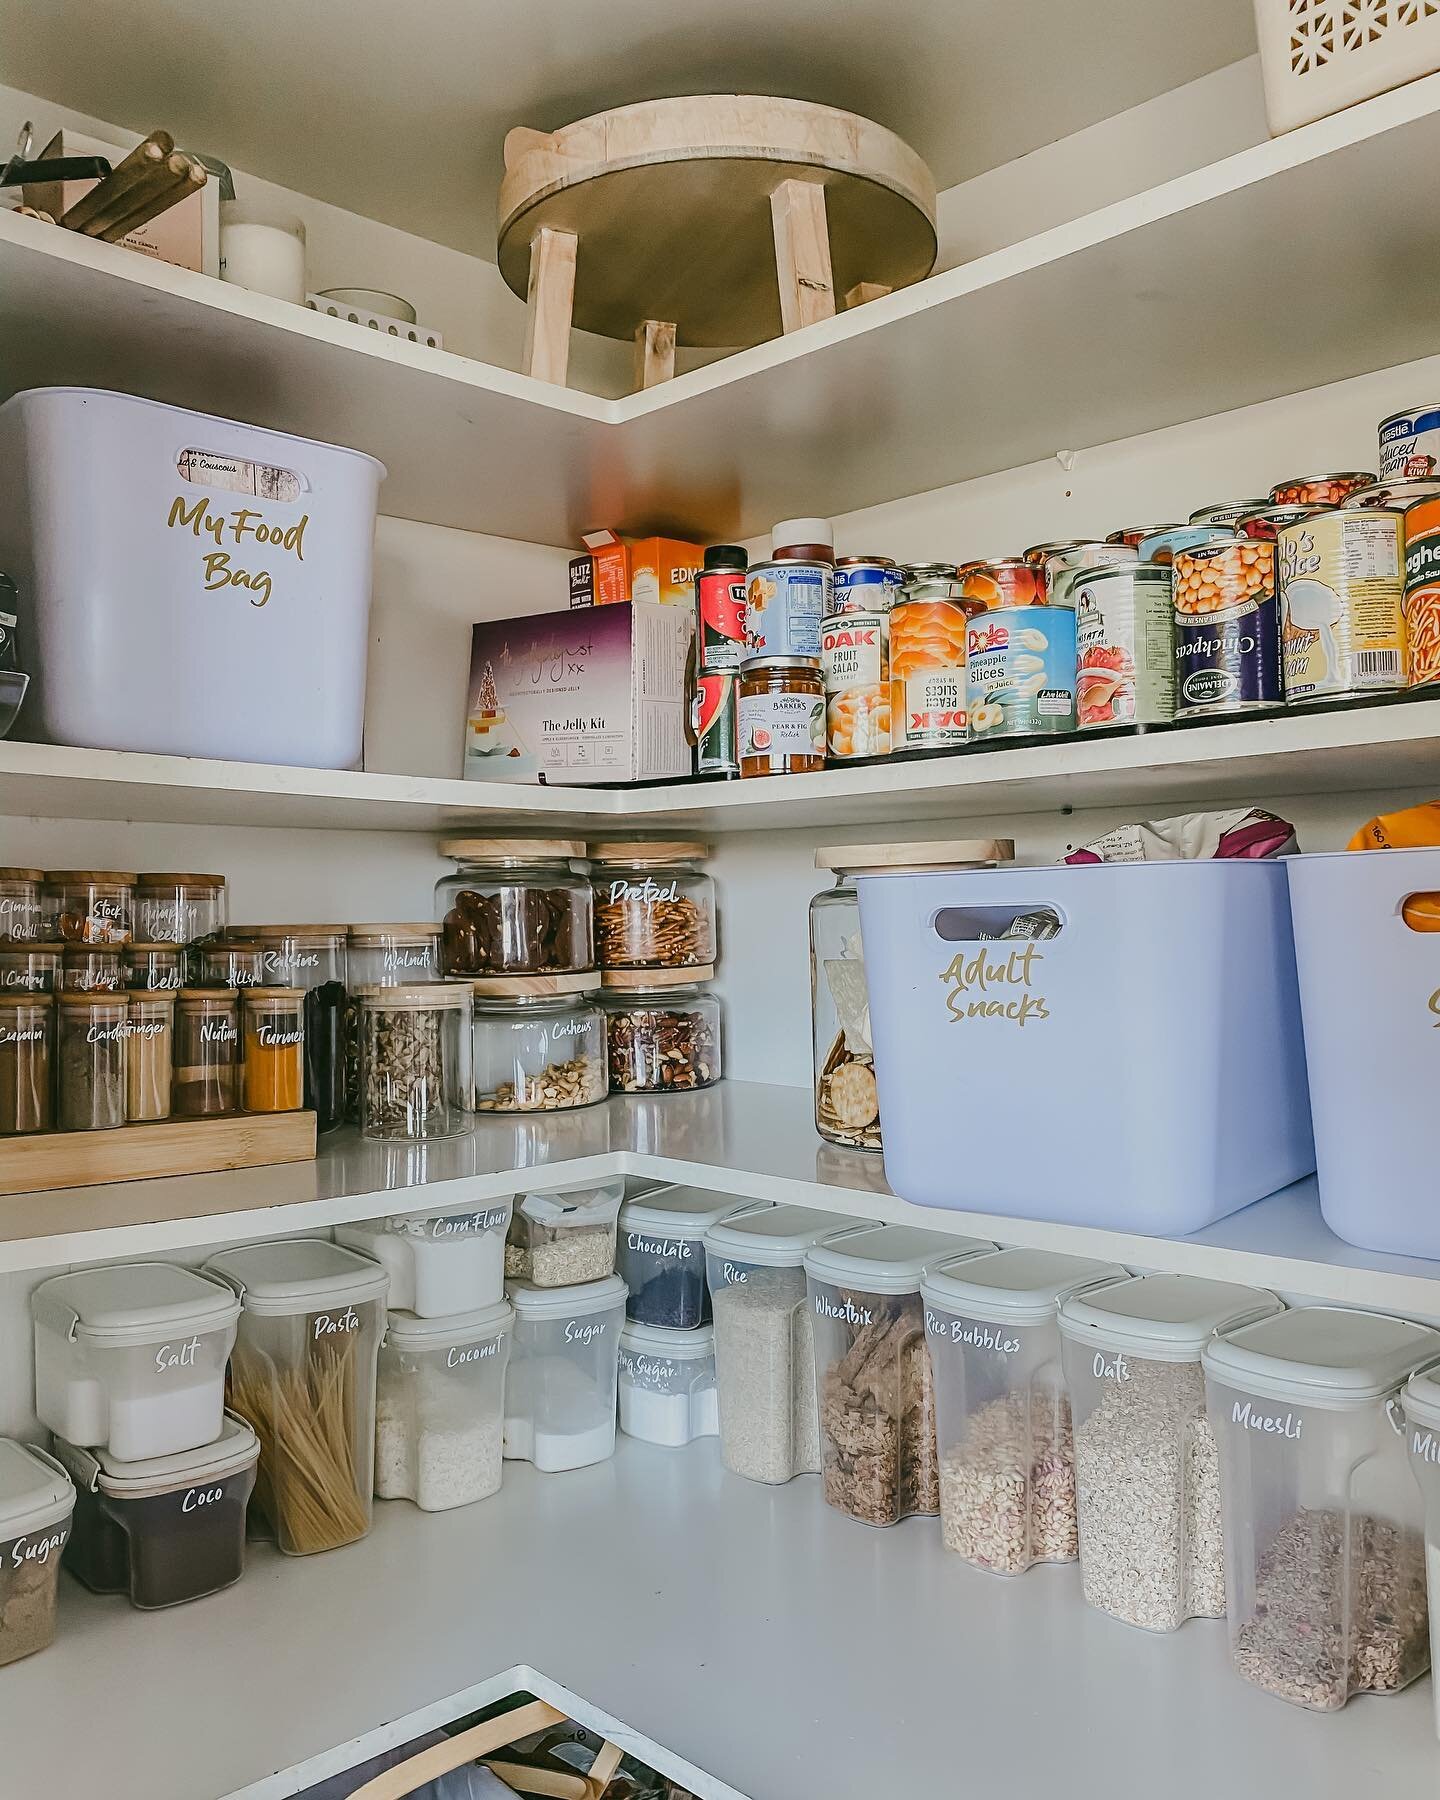 What's the most organised space in your house? For me it's currently my pantry. It's been so fun making new labels and re organising things.
Swipe to see my massive recycle bin. I hate taking it out everyday so this was a great solutions. (It's next 